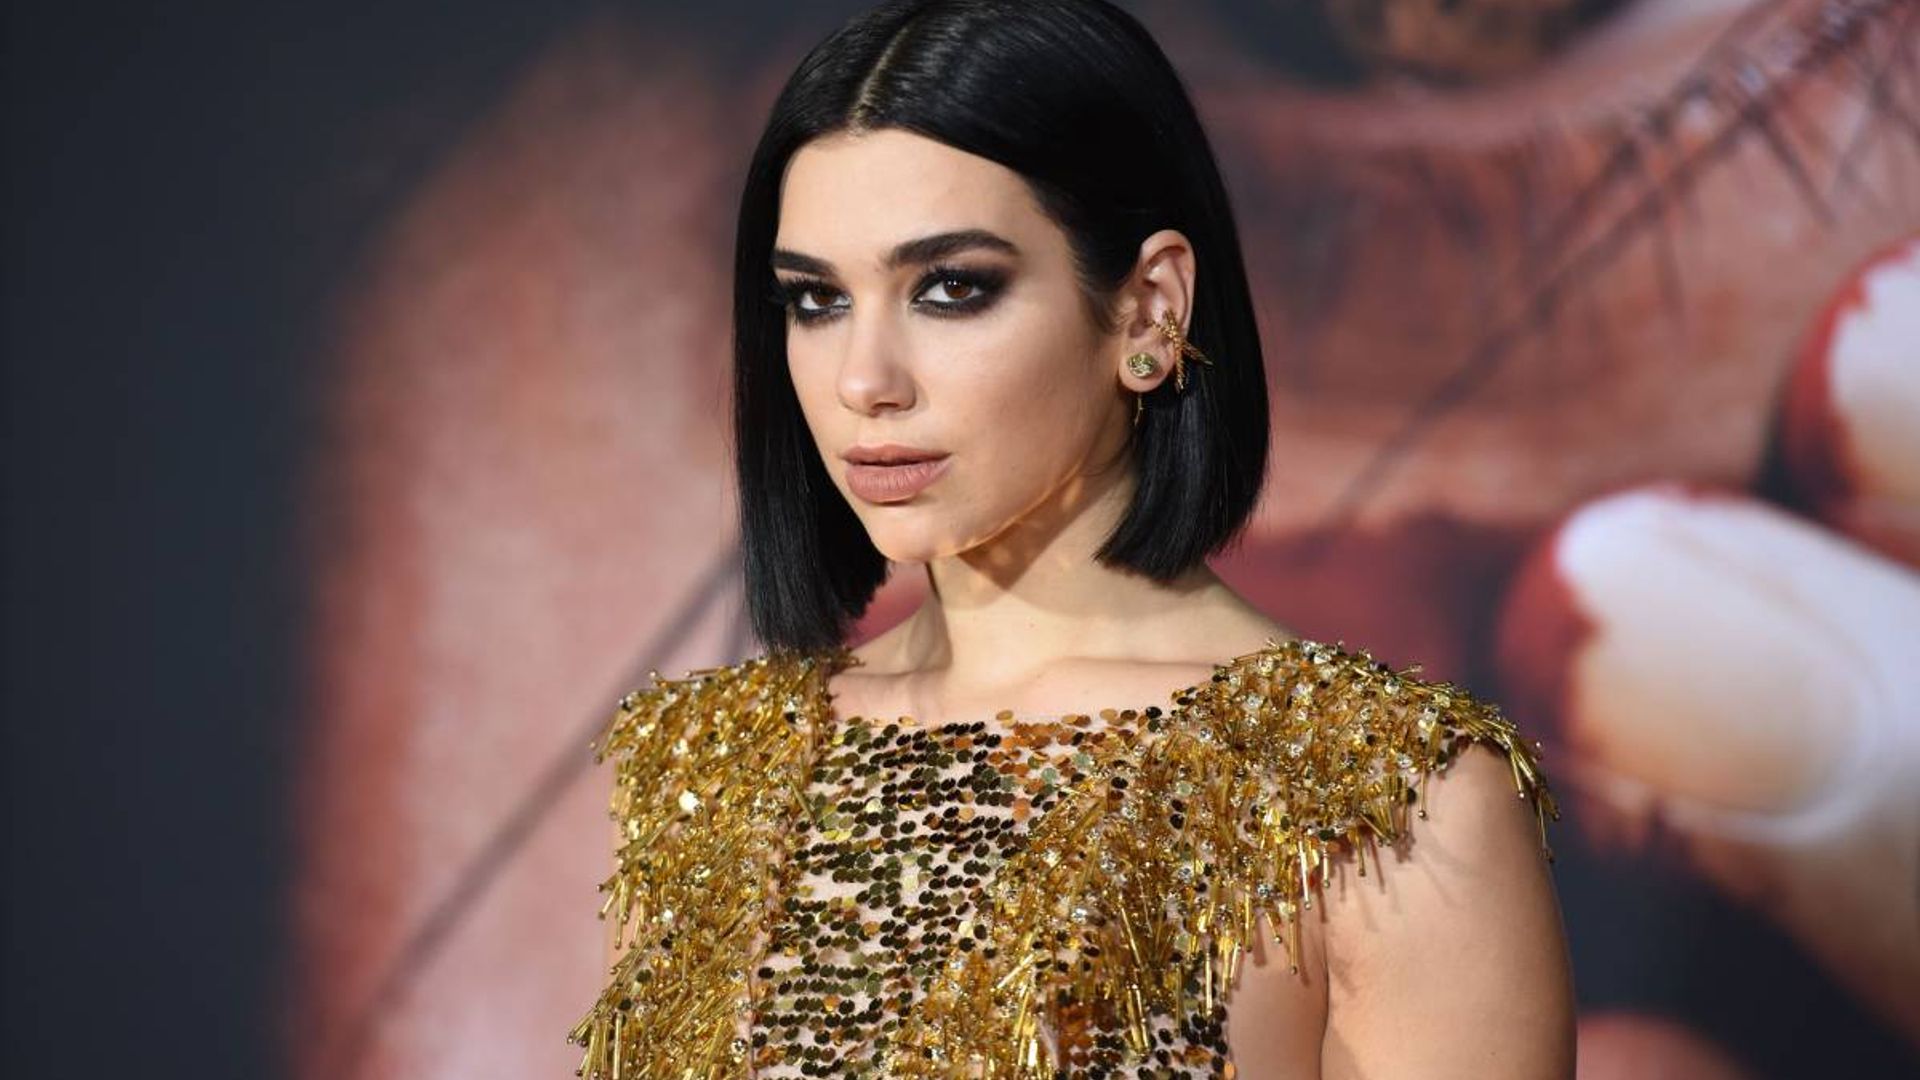 Dua Lipa wows in a glam lace-up crop top and massive heels Lady Gaga would love